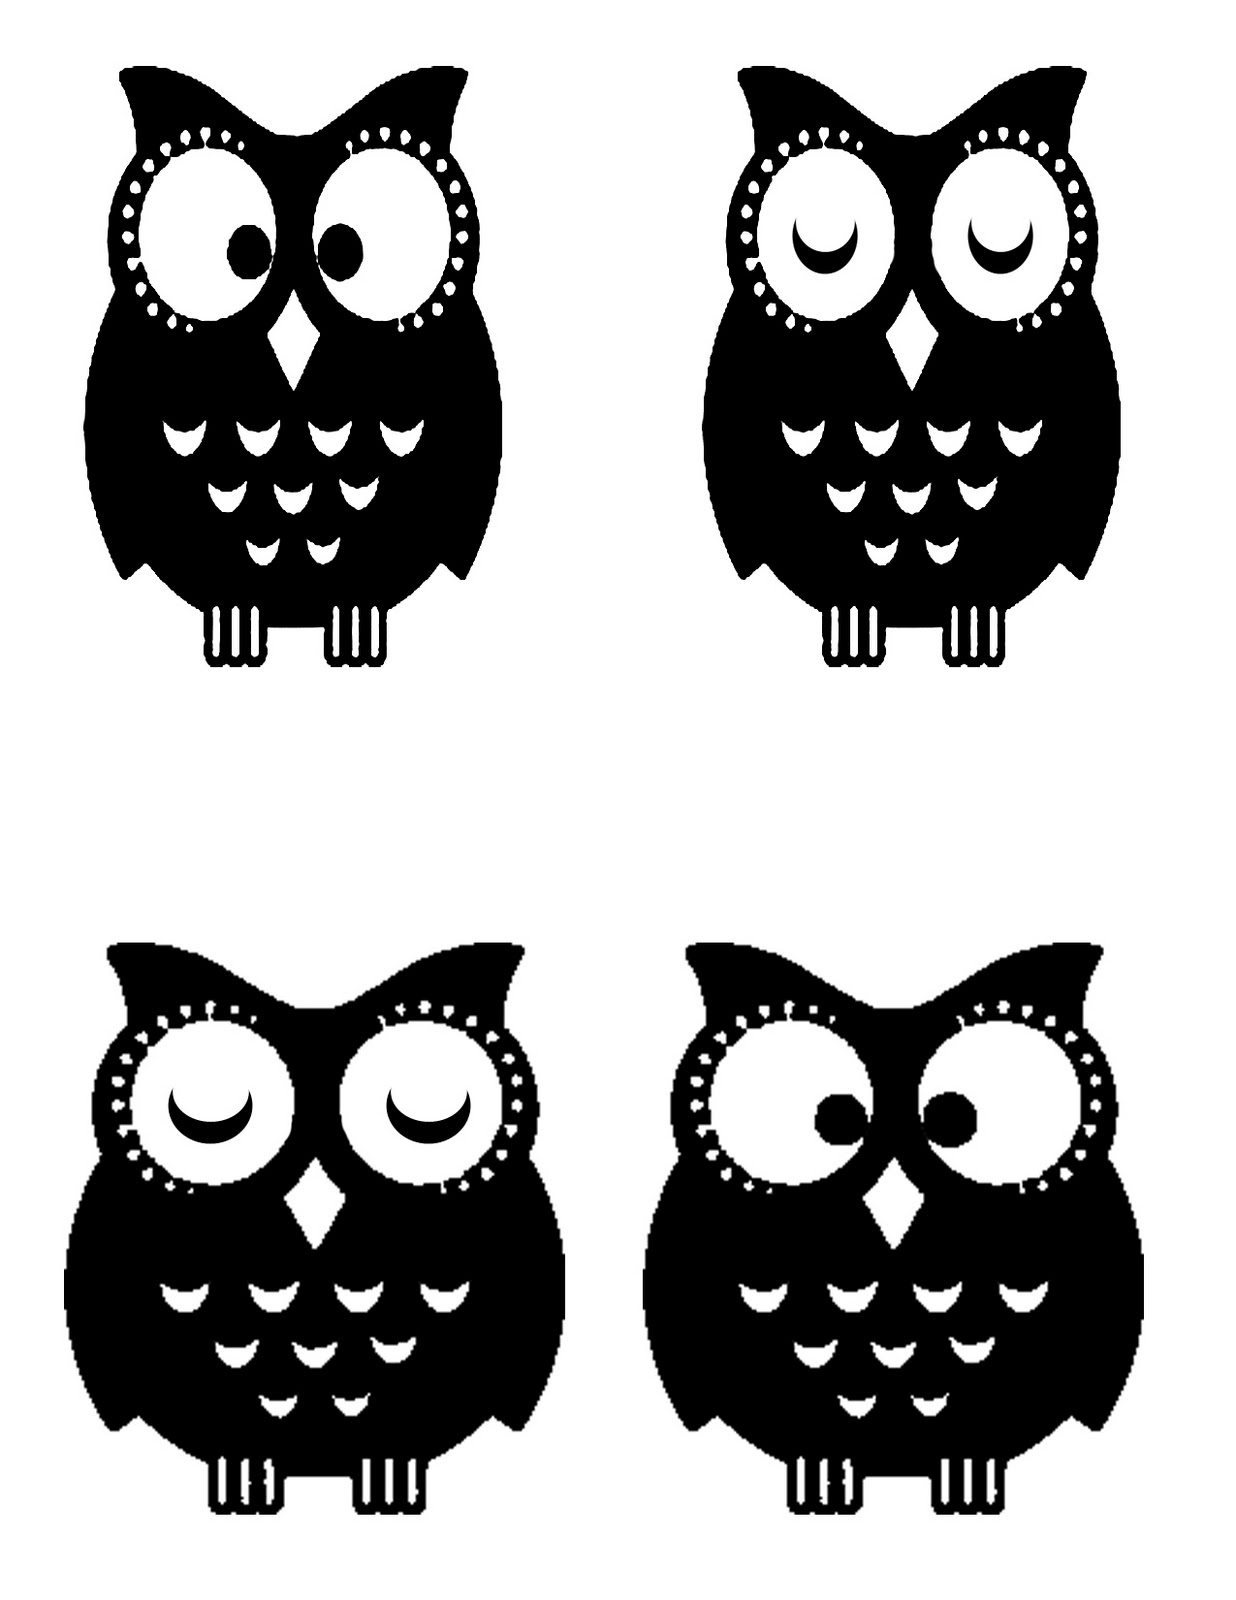 Download Nursery Decorating Ideas Part 4: Vintage Windows with Owls!